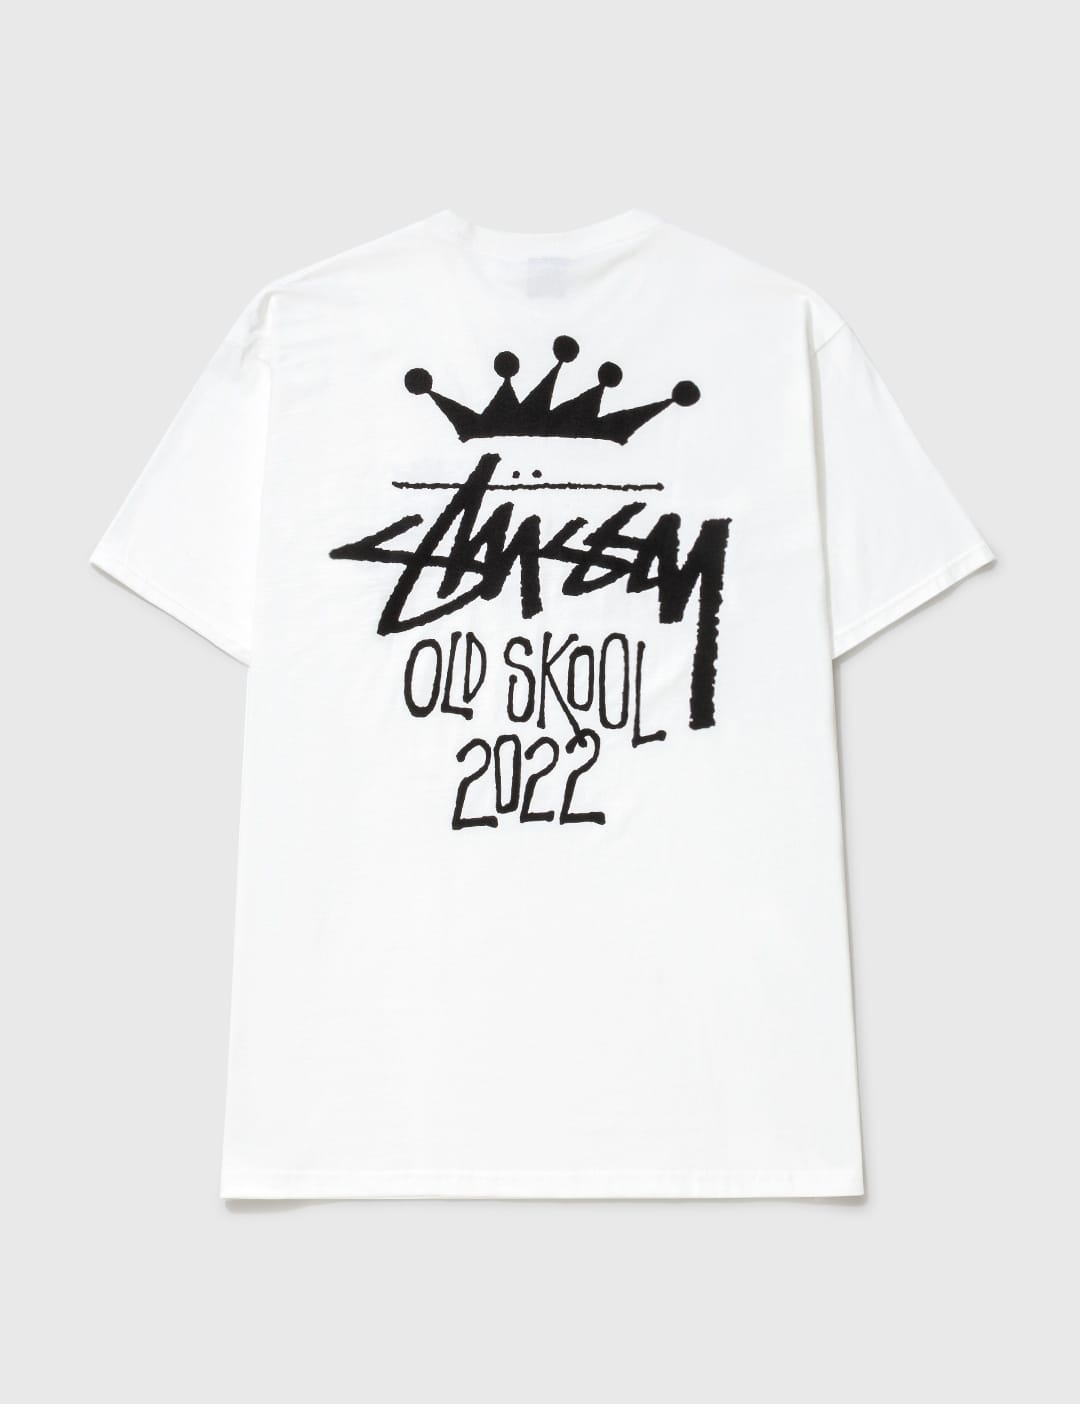 Stüssy - OLD SKOOL 22 T-SHIRT | HBX - Globally Curated Fashion and